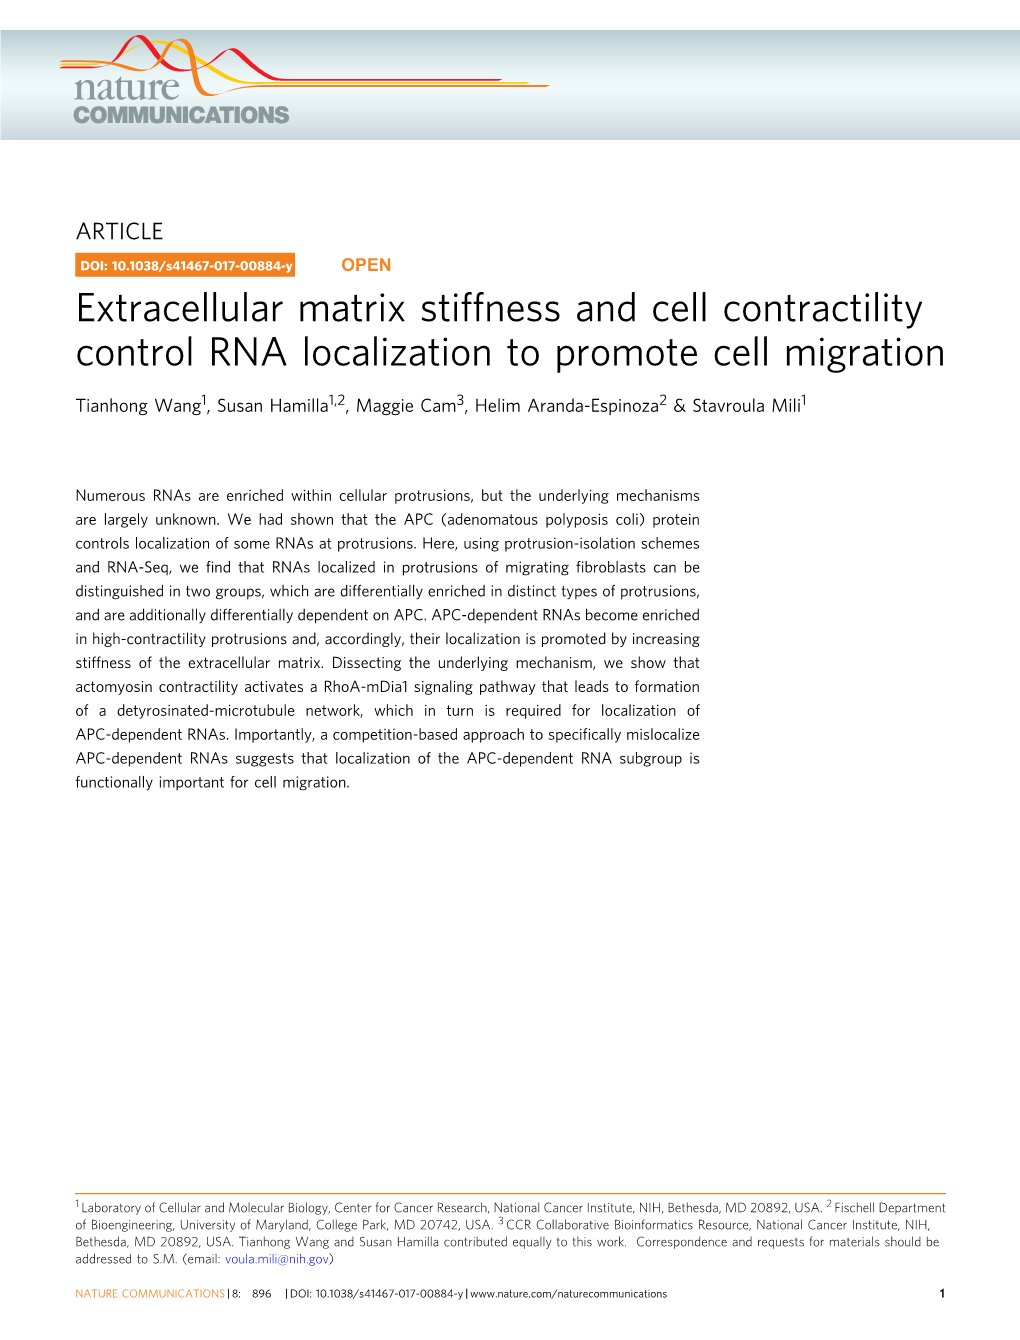 Extracellular Matrix Stiffness and Cell Contractility Control RNA Localization to Promote Cell Migration